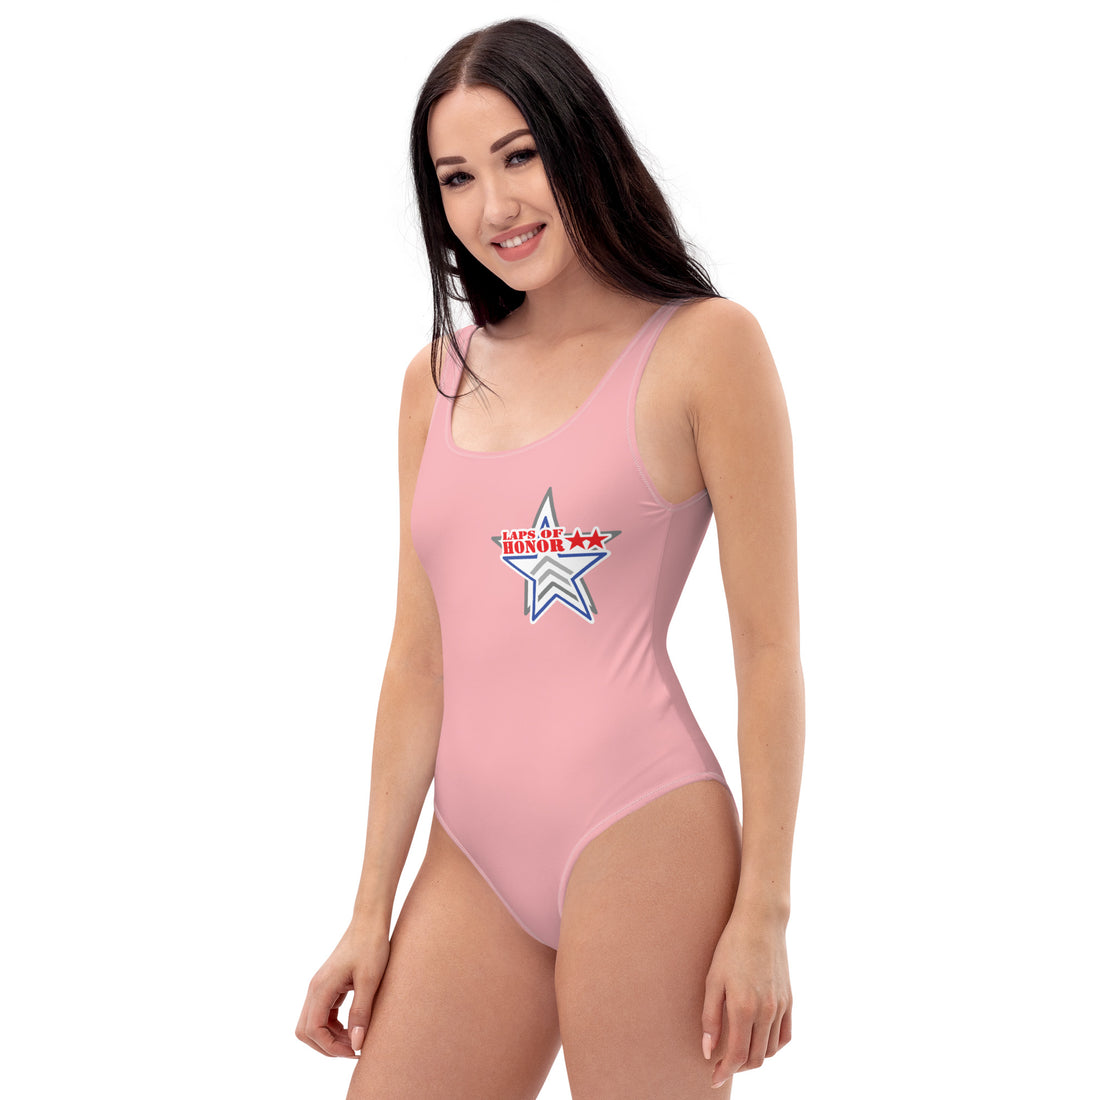 Laps of Honor: Swimsuit for a Cause